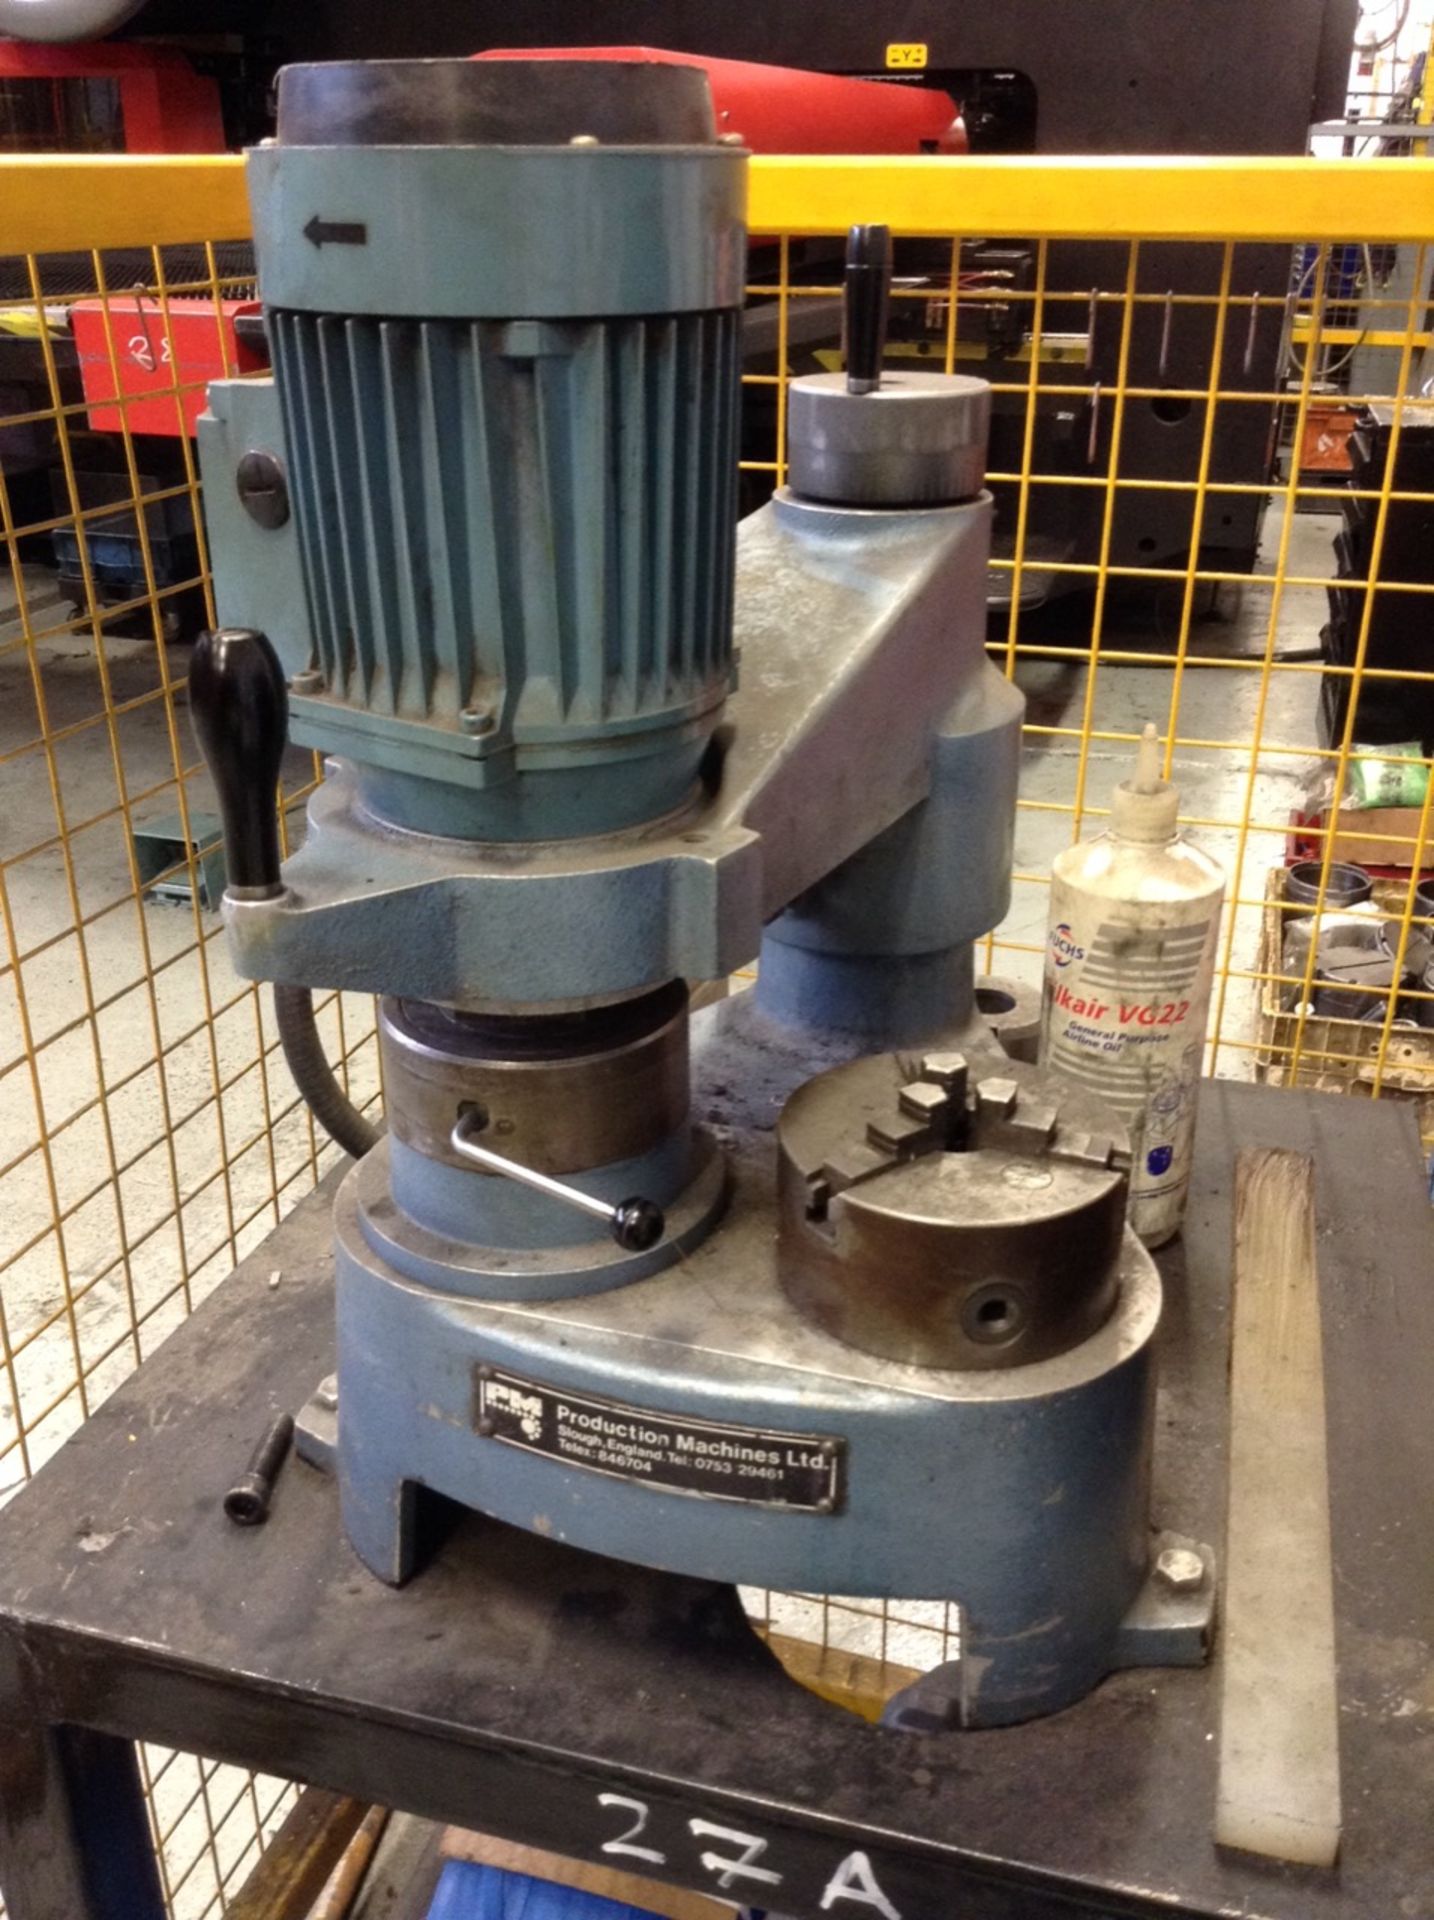 1 Production Machines, Swing over tool grinder, Serial Number: 384